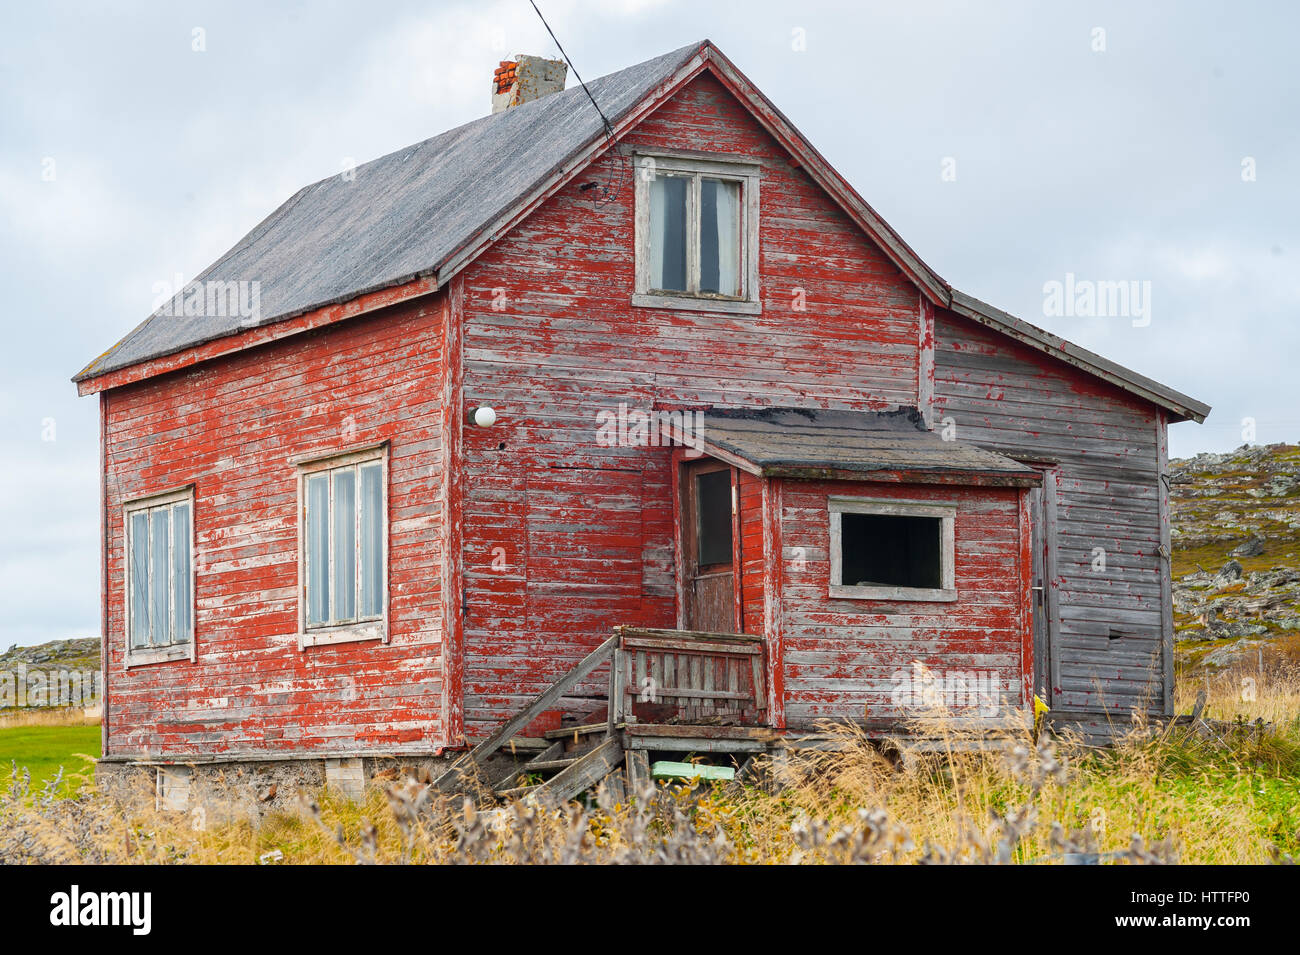 Weathered old wooden country house in need of repair Stock Photo